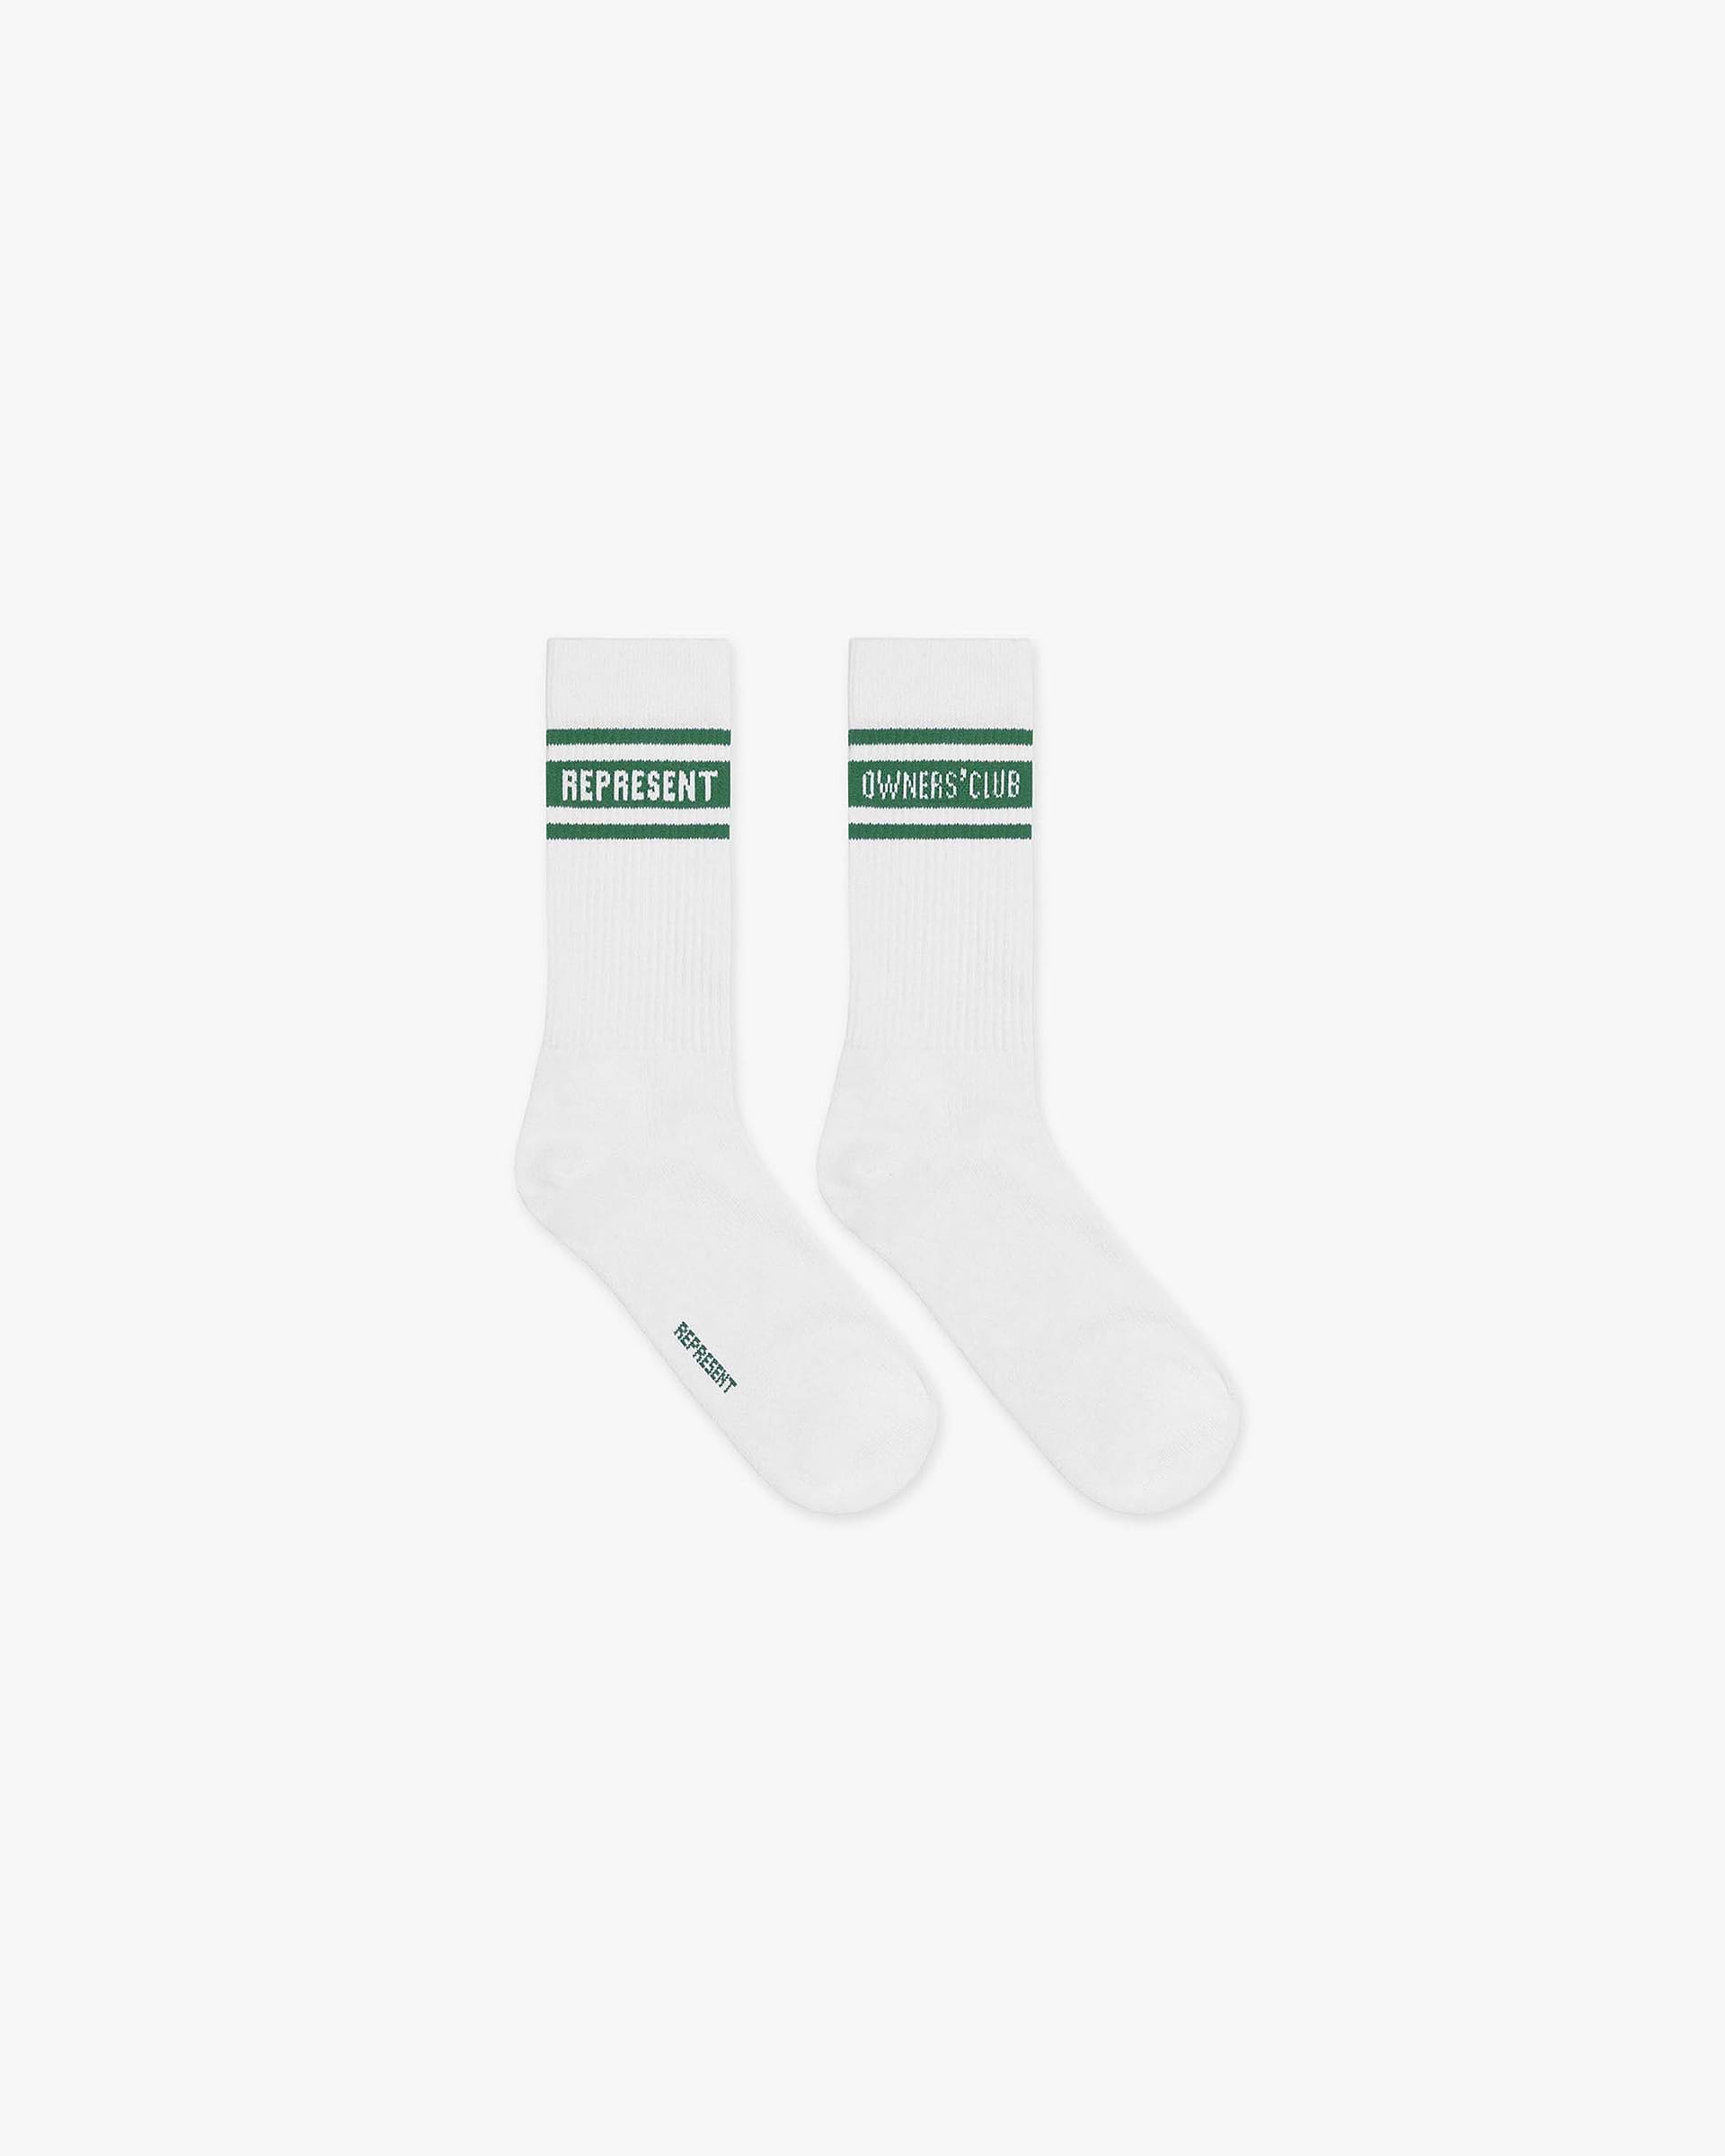 Represent Owners Club Socks | Flat White Racing Green Accessories Owners Club | Represent Clo